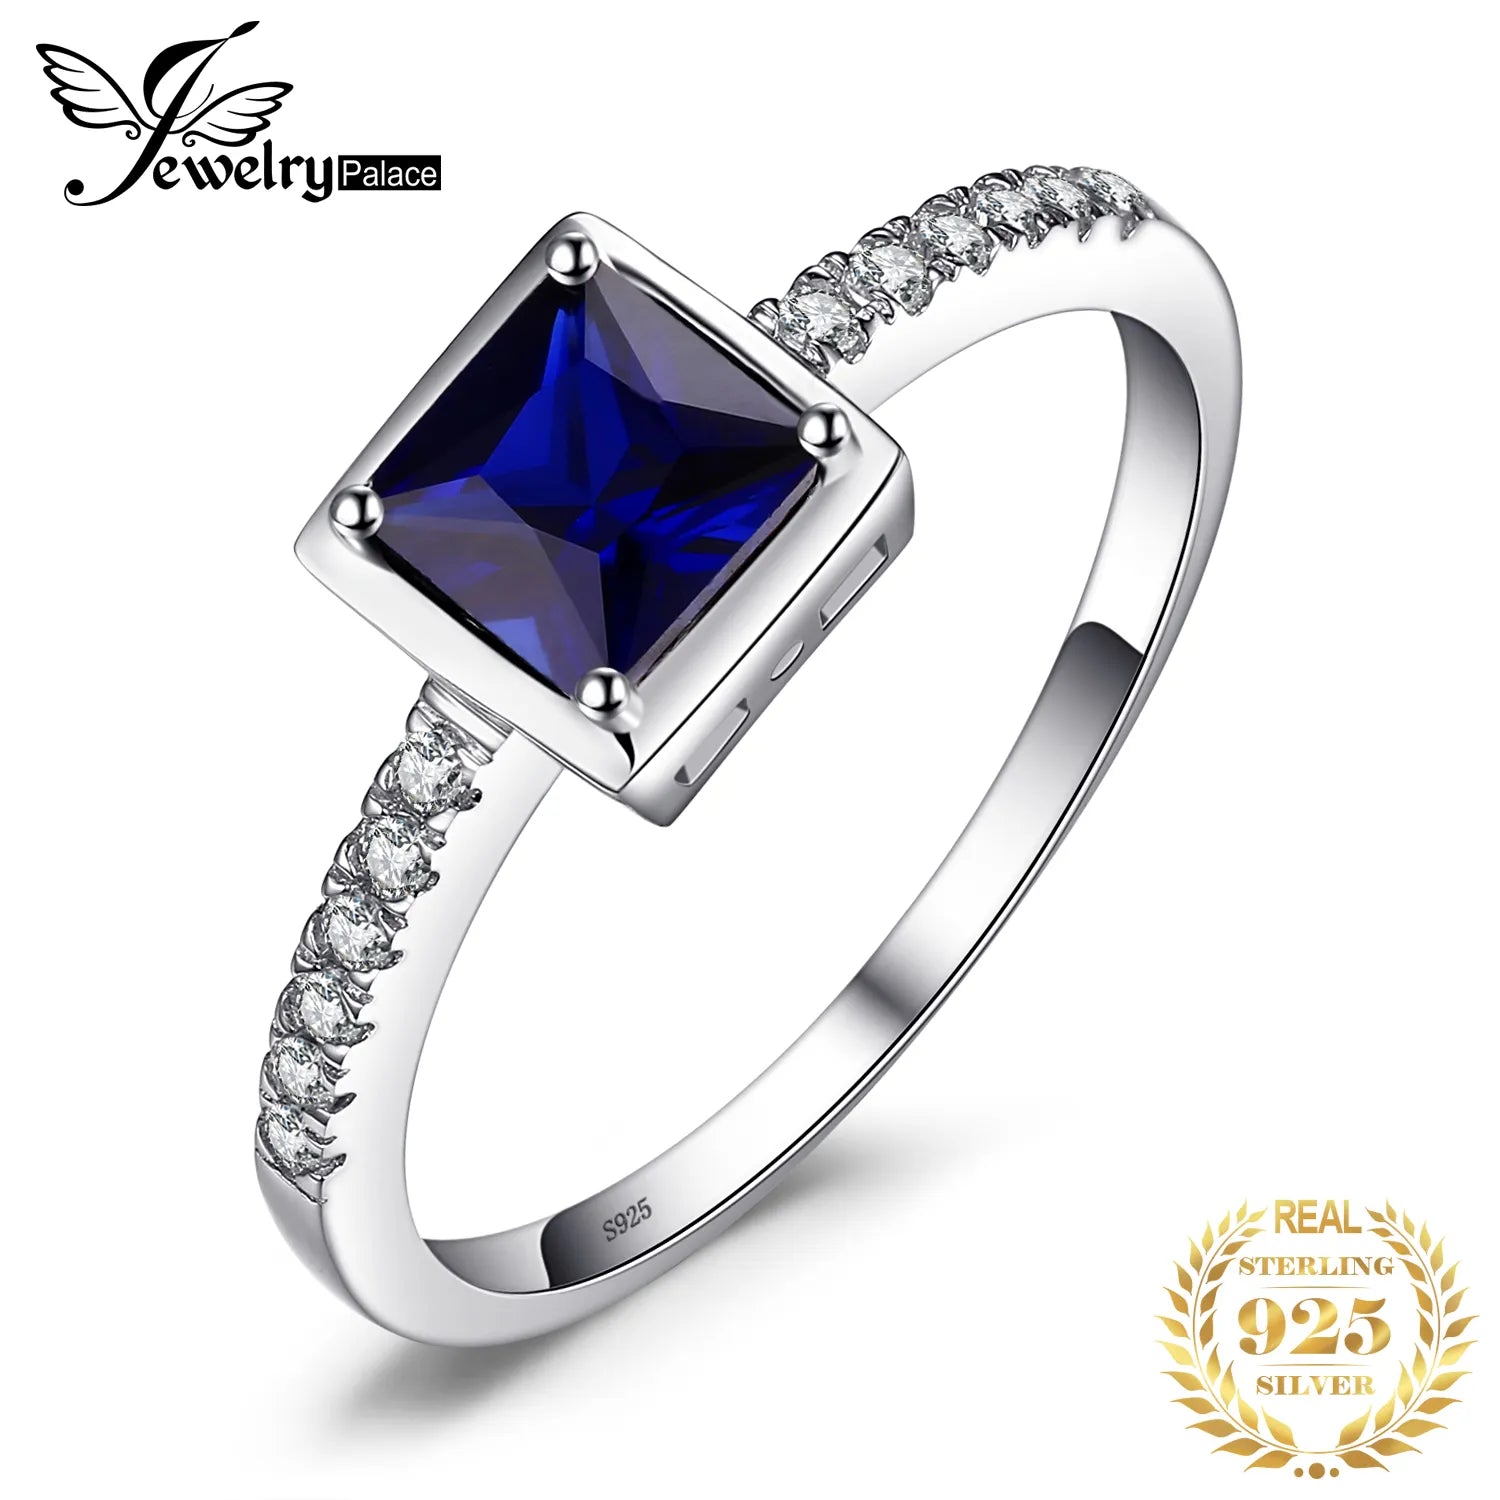 JewelryPalace Square Created Blue Sapphire 925 Sterling Silver Ring for Women Fashion Fine Jewelry